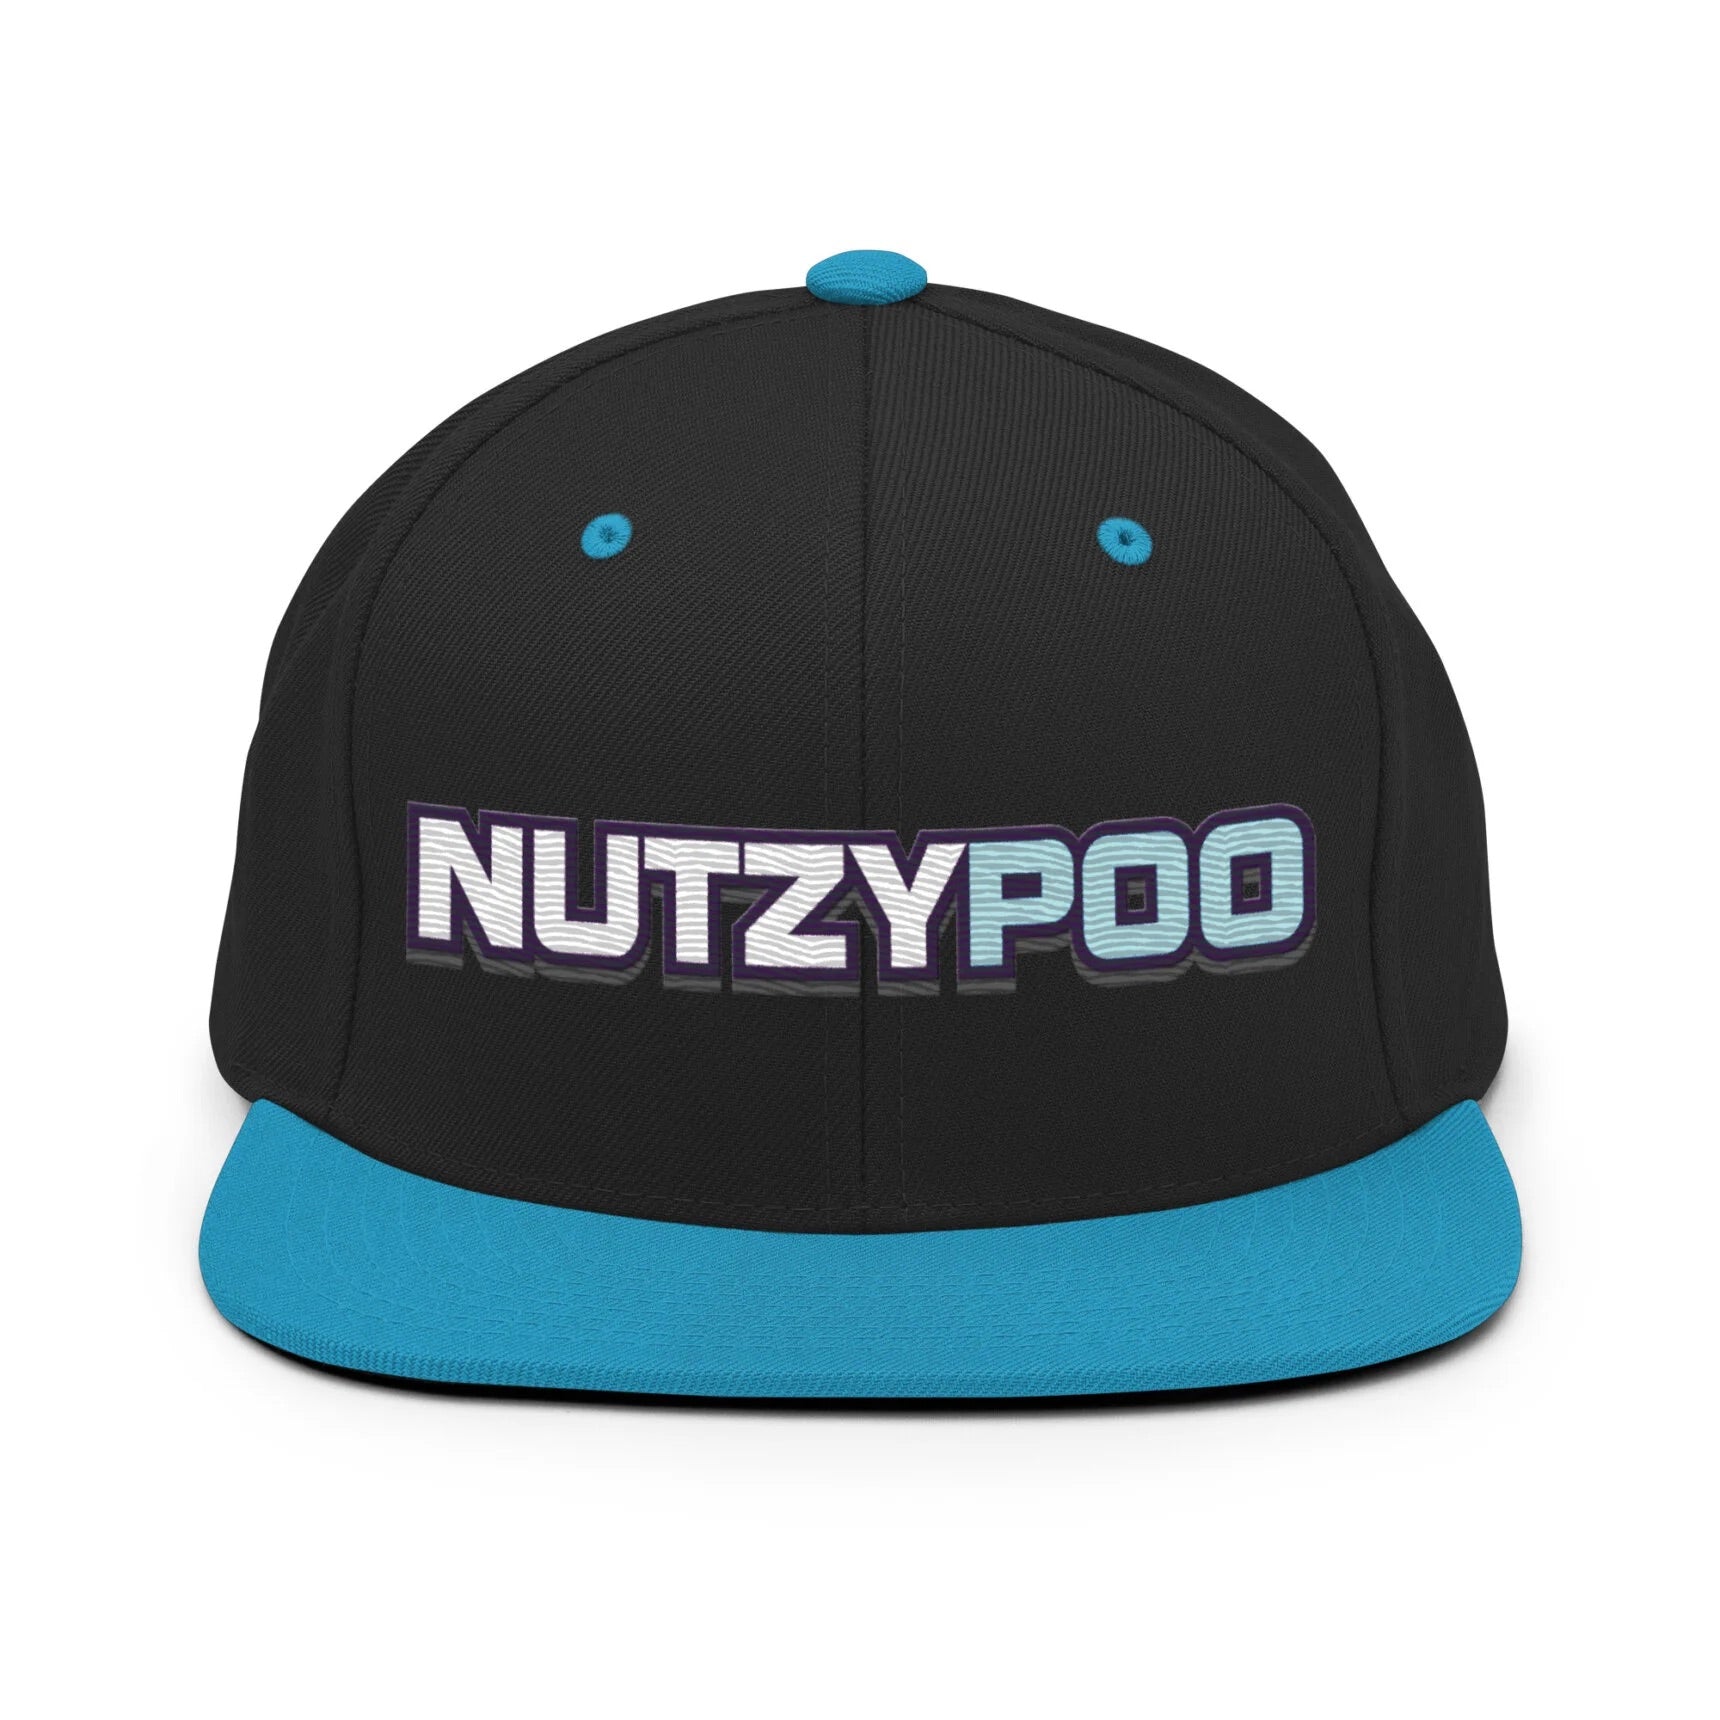 NutzyPoo ShowZone hat in black with blue brim and accents